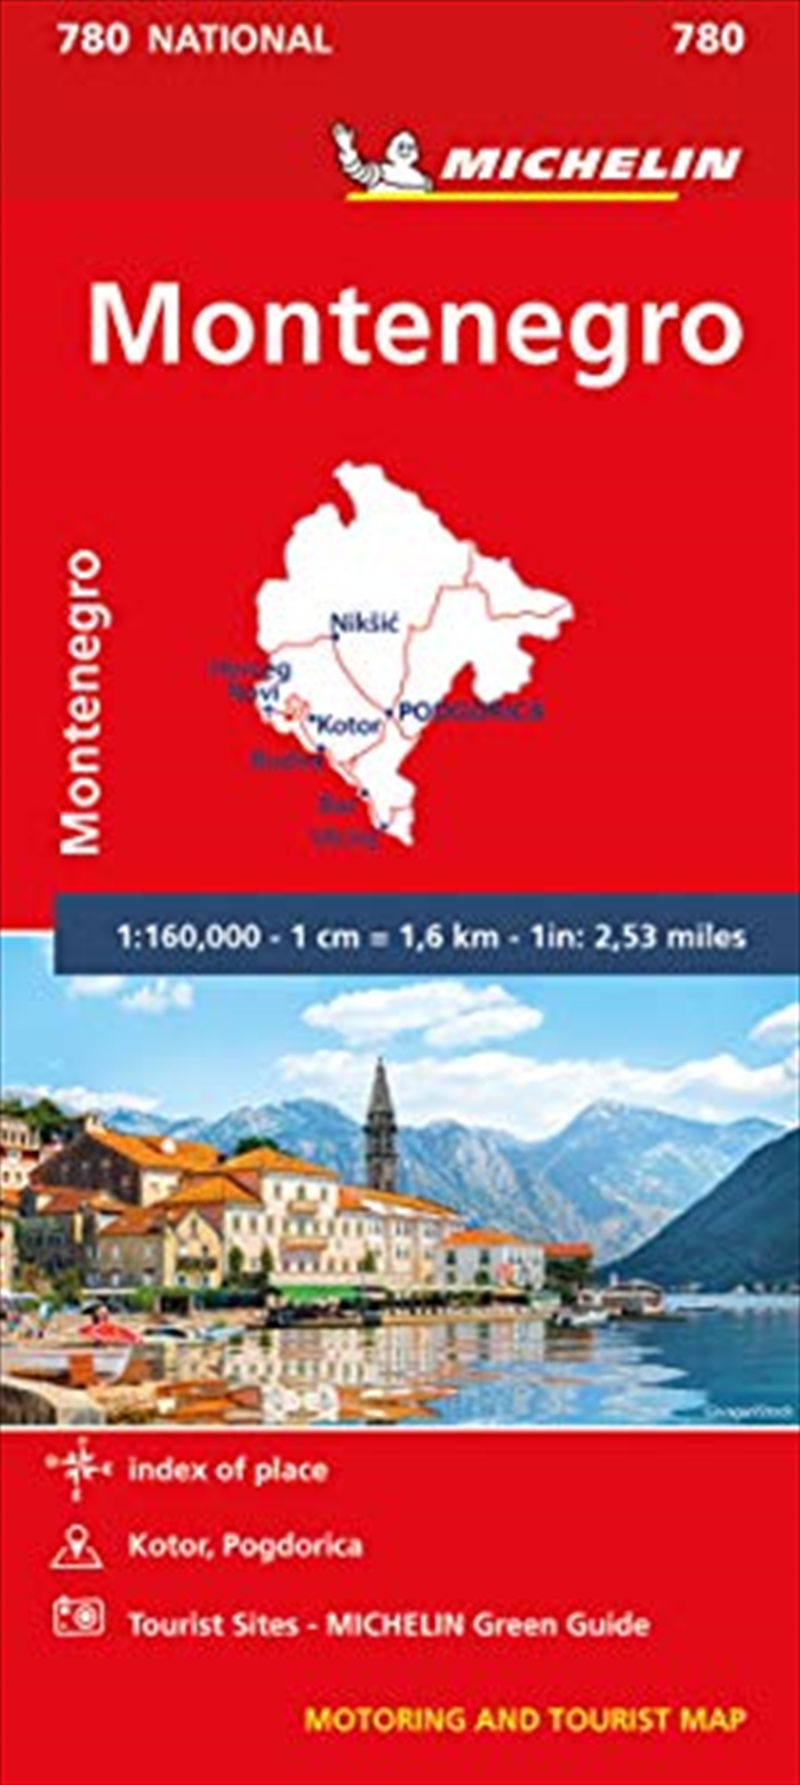 Michelin Montenegro Road and Tourist Map No 780 (Michelin Road and Tourist Map)/Product Detail/Recipes, Food & Drink